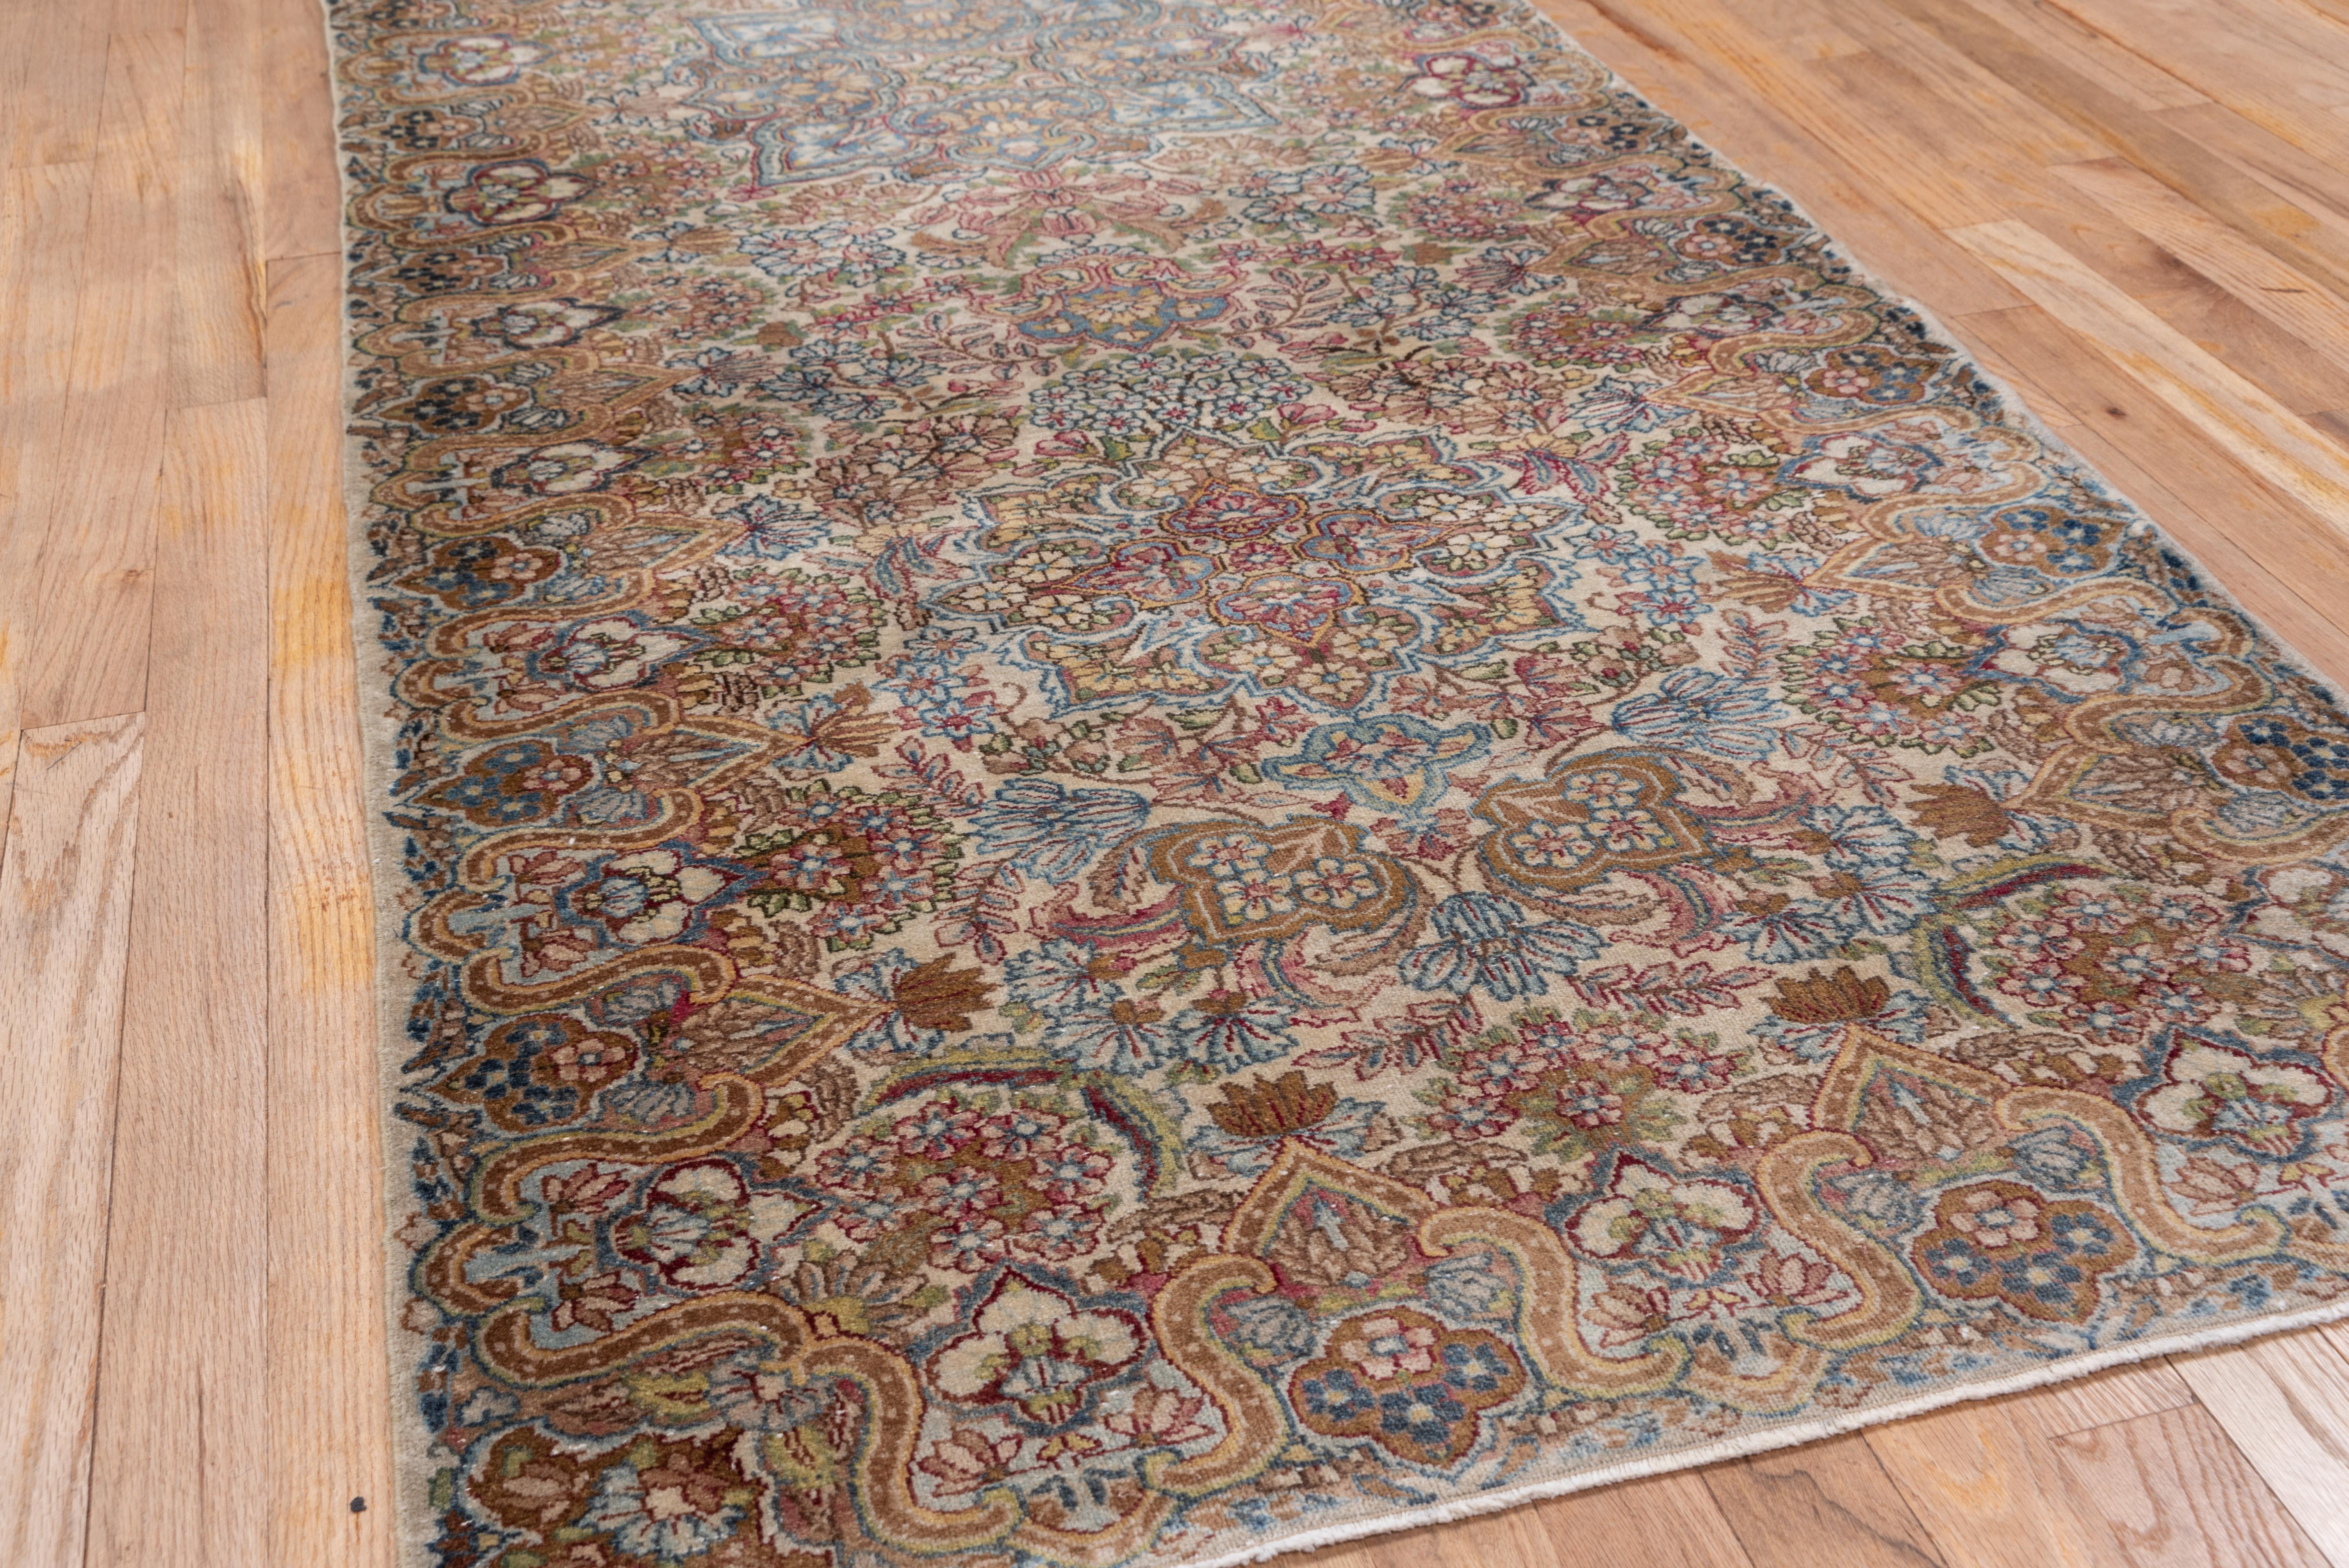 Hand-Knotted Gorgeous Antique Persian Kerman Runner with Jewel Tones, circa 1920s